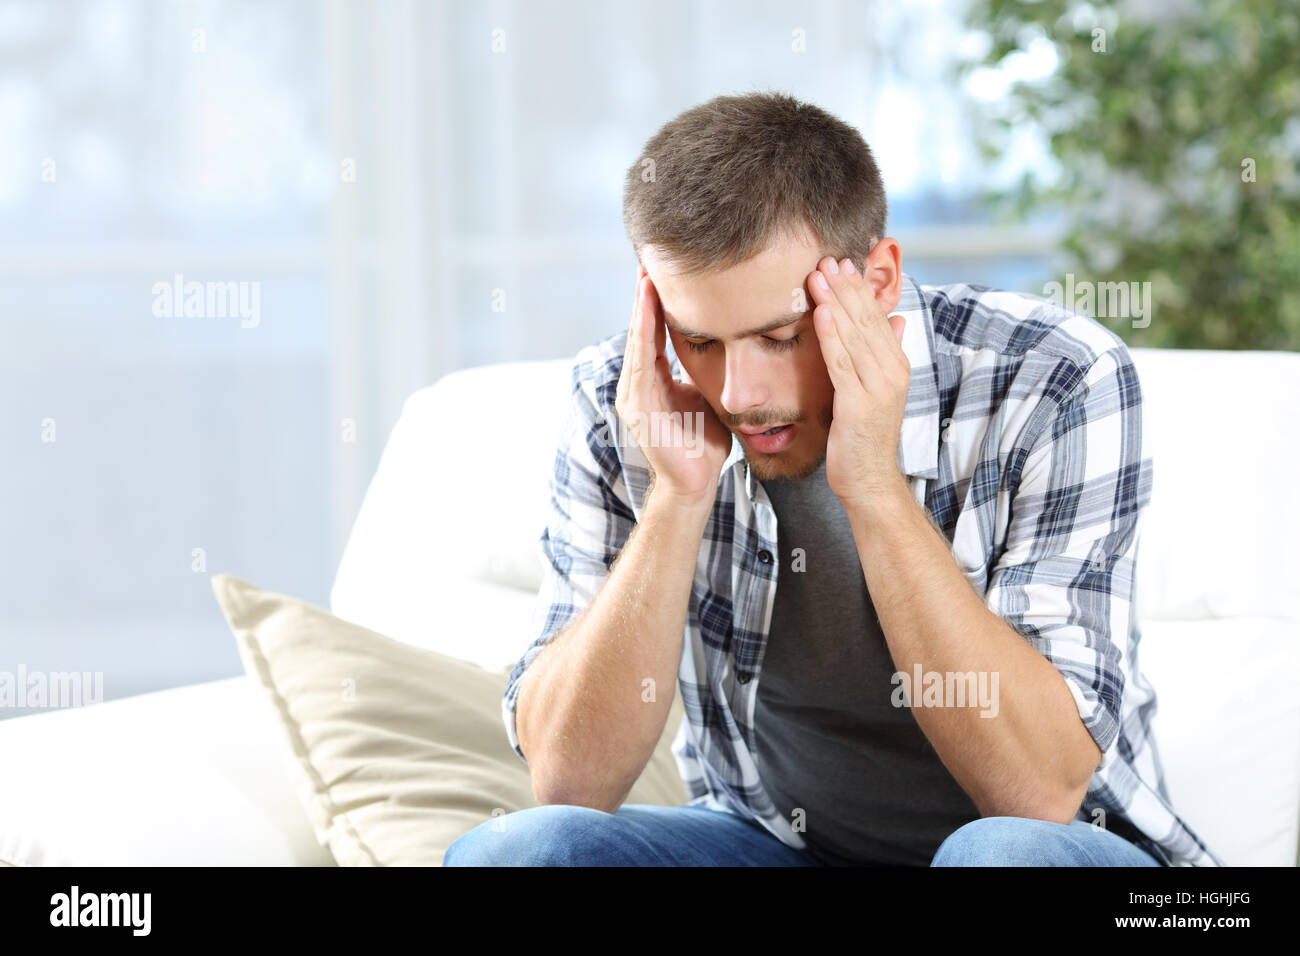 Man suffering headache sitting on a sofa in the living room at home Stock Photo